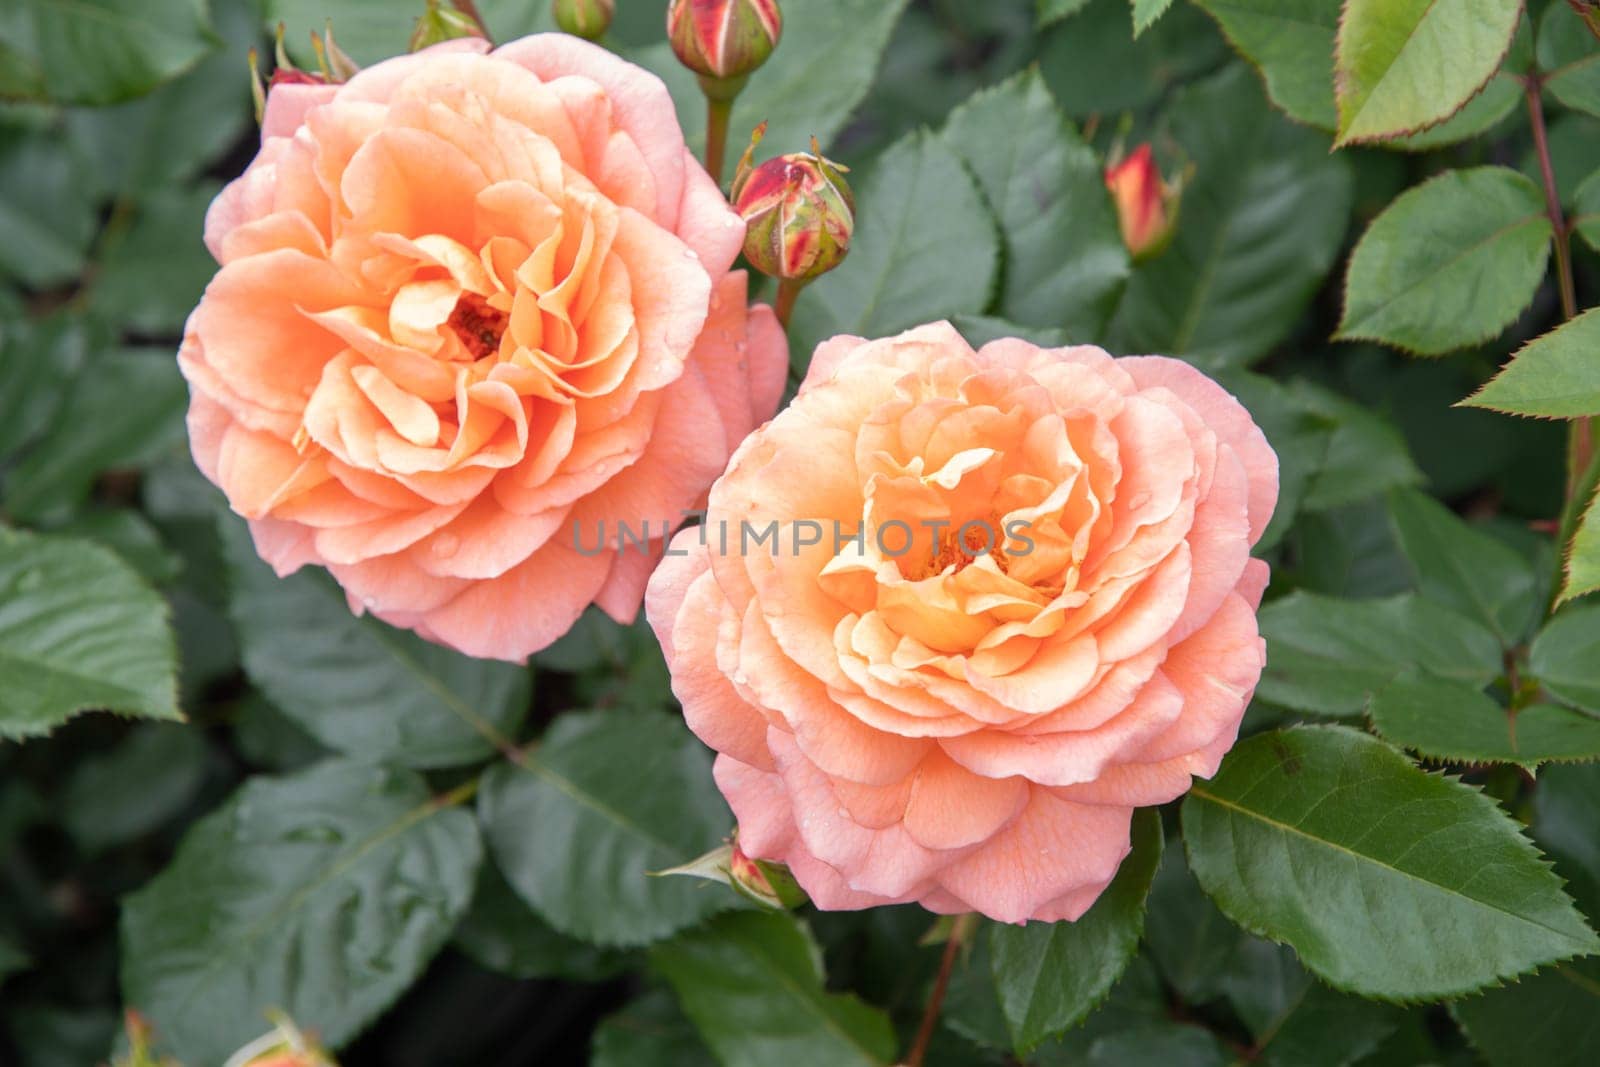 two delicate peach roses in full bloom against the background of green leaves by KaterinaDalemans